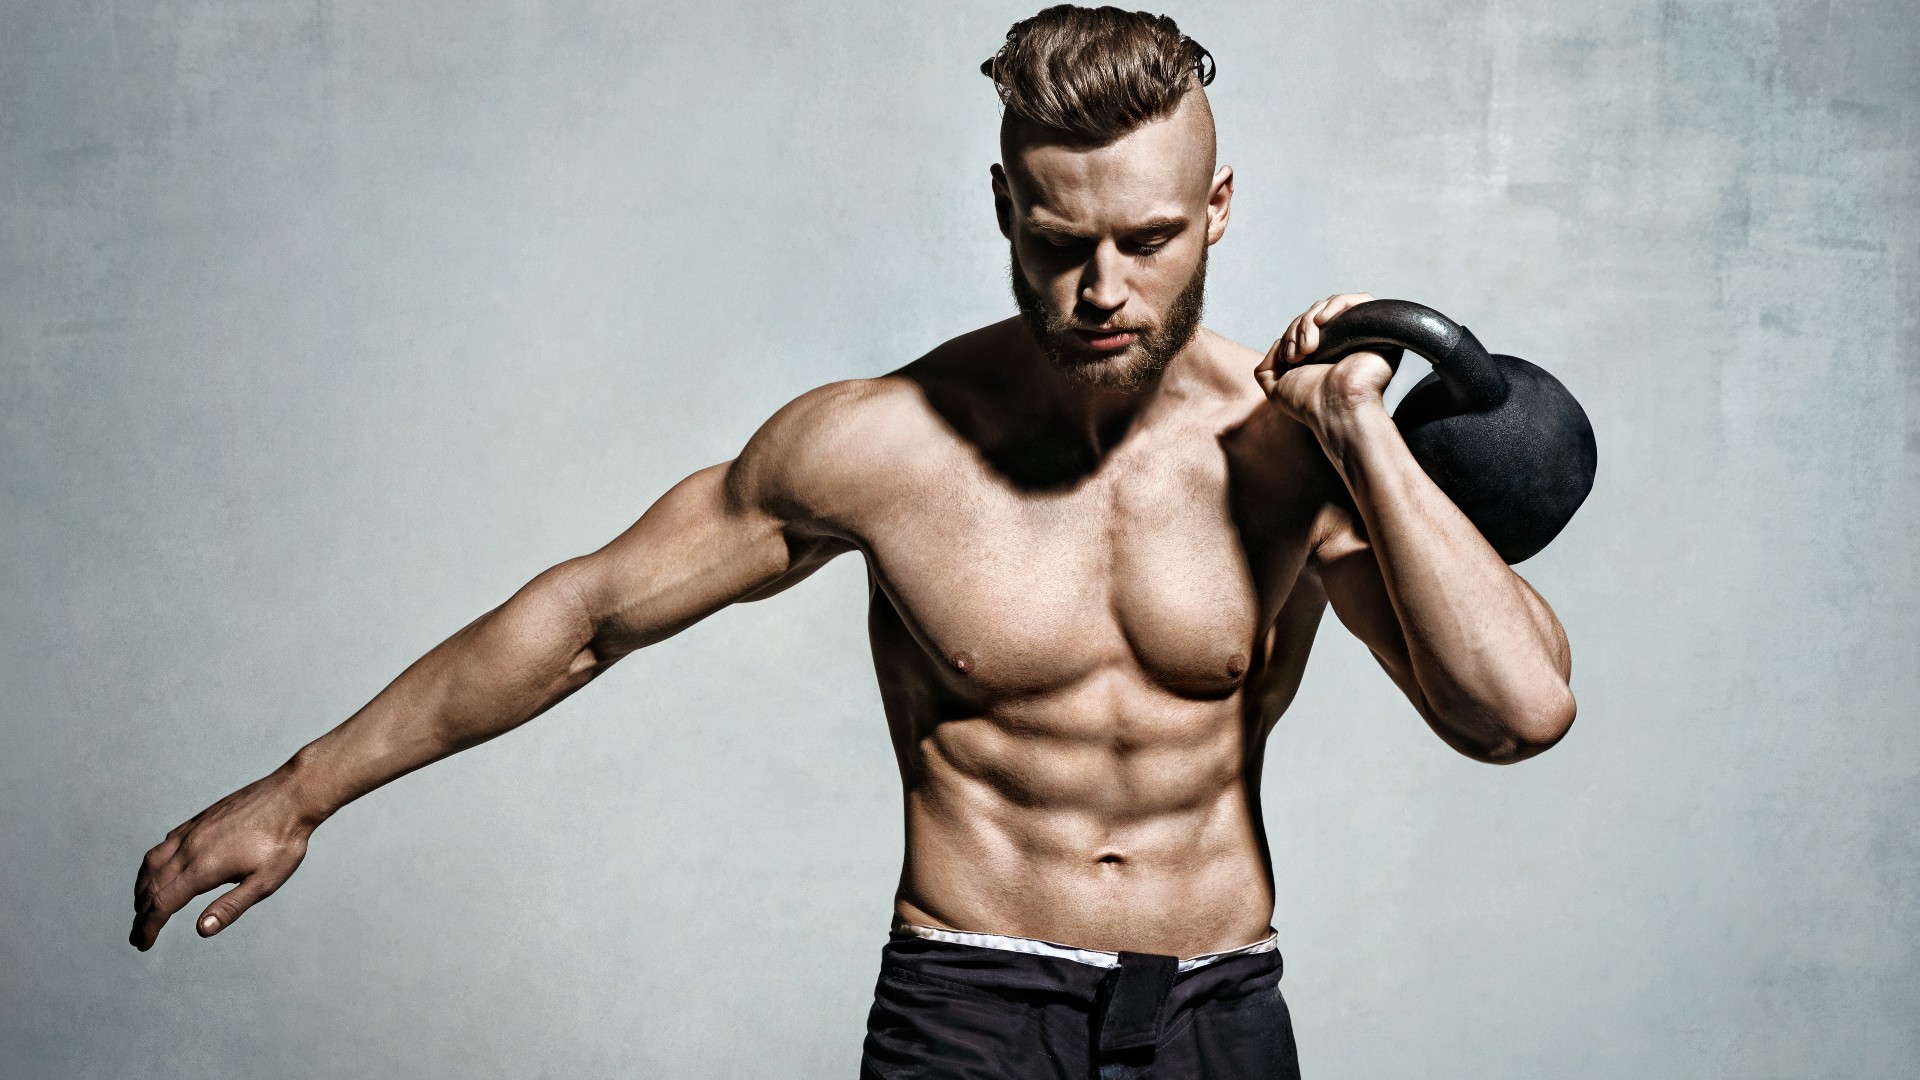 You just need 7 exercises and 1 kettlebell to chisel your chest, back and  shoulder muscles